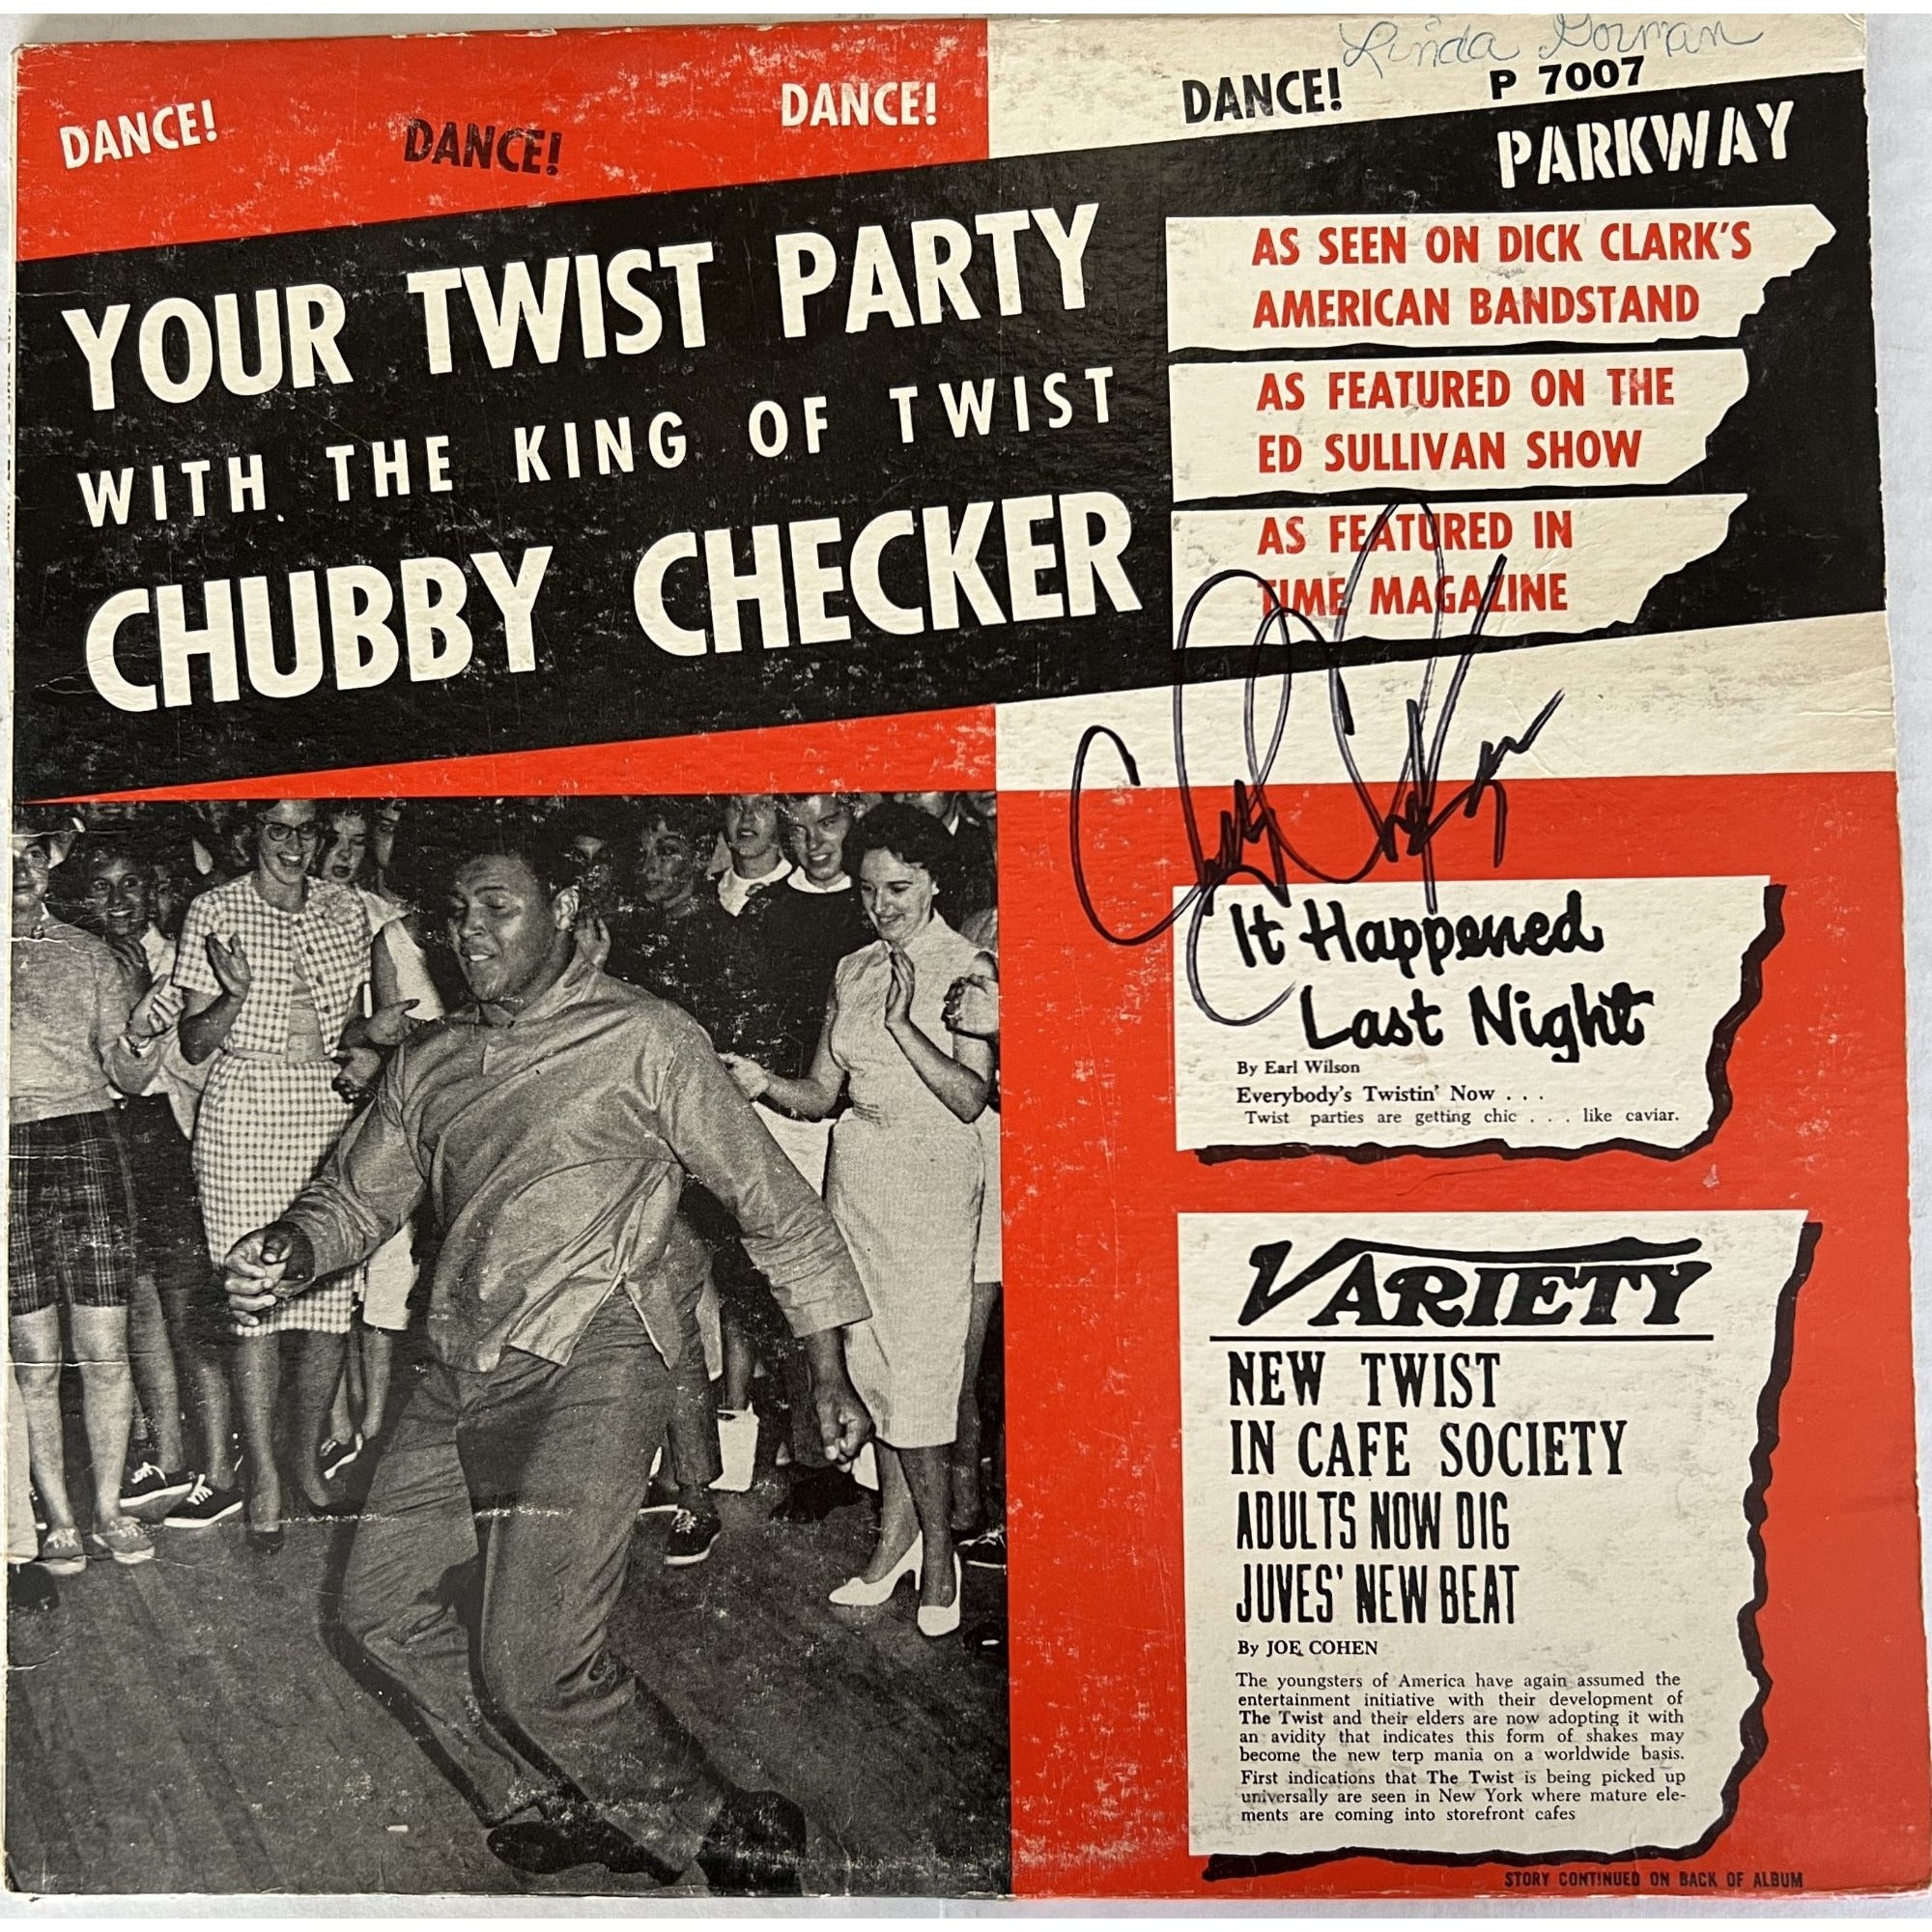 Ernest Evans "Chubby Checker" LP signed with